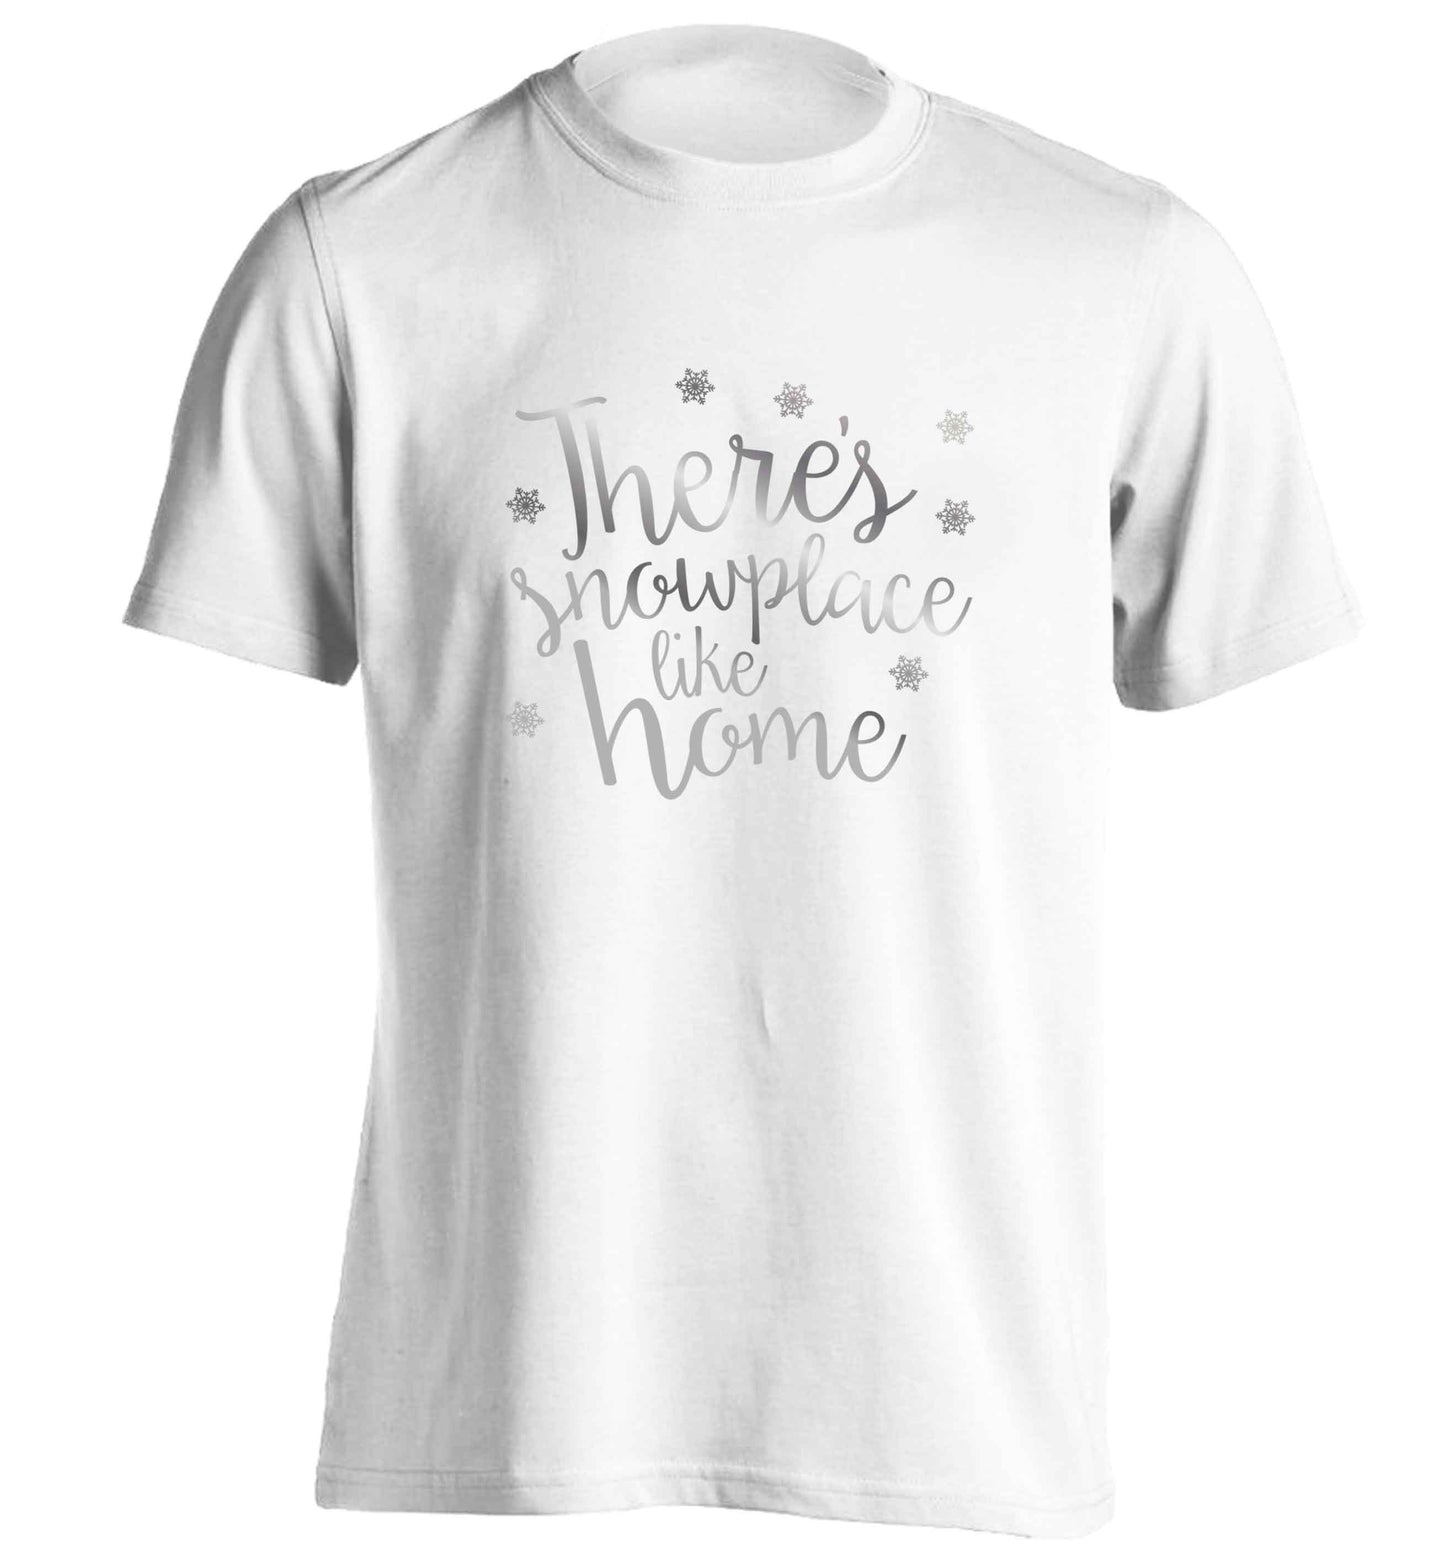 There's snowplace like home - metallic silver adults unisex white Tshirt 2XL